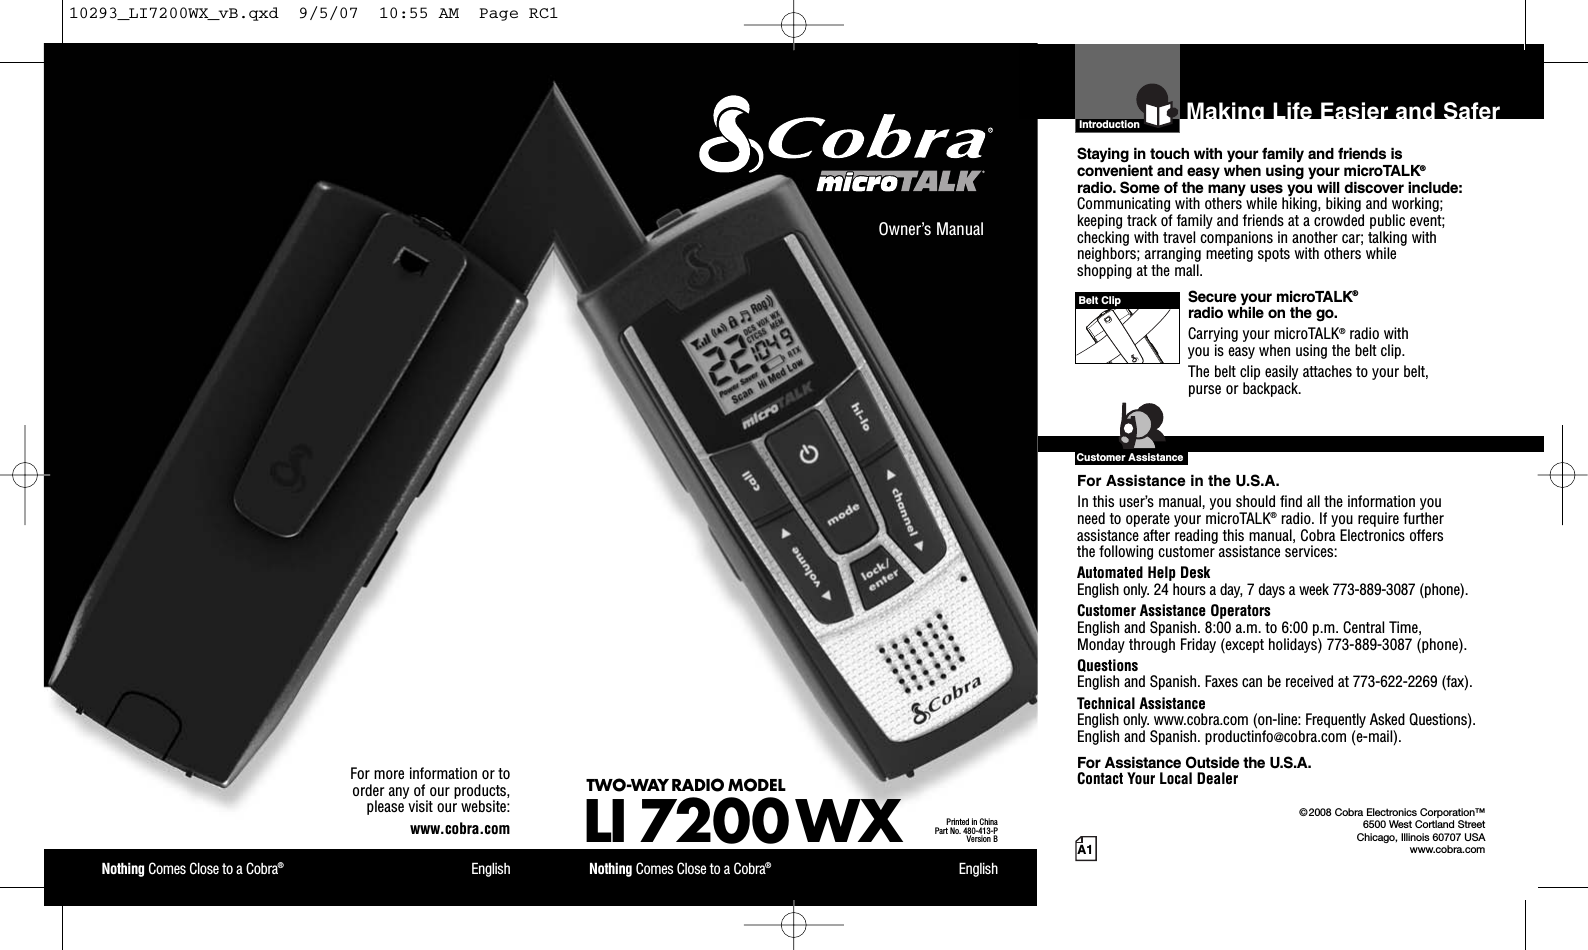 Nothing Comes Close to a Cobra®EnglishFor more information or to order any of our products, please visit our website:www.cobra.comA1Making Life Easier and SaferOwner’s ManualNothing Comes Close to a Cobra®EnglishTWO-WAY RADIO MODEL LI 7200 WXPrinted in ChinaPart No. 480-413-PVersion BIntro Operation CustomerAssistanceWarrantyNoticeMain IconsSecondary IconsIntroductionStaying in touch with your family and friends is convenient and easy when using your microTALK®radio. Some of the many uses you will discover include:Communicating with others while hiking, biking and working;keeping track of family and friends at a crowded public event;checking with travel companions in another car; talking withneighbors; arranging meeting spots with others while shopping at the mall.Secure your microTALK®radio while on the go.Carrying your microTALK®radio with you is easy when using the belt clip. The belt clip easily attaches to your belt, purse or backpack. For Assistance in the U.S.A.In this user’s manual, you should find all the information you need to operate your microTALK®radio. If you require furtherassistance after reading this manual, Cobra Electronics offers the following customer assistance services:Automated Help Desk English only. 24 hours a day, 7 days a week 773-889-3087 (phone). Customer Assistance OperatorsEnglish and Spanish. 8:00 a.m. to 6:00 p.m. Central Time, Monday through Friday (except holidays) 773-889-3087 (phone). QuestionsEnglish and Spanish. Faxes can be received at 773-622-2269 (fax). Technical AssistanceEnglish only. www.cobra.com (on-line: Frequently Asked Questions). English and Spanish. productinfo@cobra.com (e-mail).For Assistance Outside the U.S.A.Contact Your Local DealerIntro Operation CustomerAssistanceWarrantyNoticeMain IconsSecondary Icons©2008 Cobra Electronics Corporation™6500 West Cortland StreetChicago, Illinois 60707 USAwww.cobra.comCustomer AssistanceBelt Clip10293_LI7200WX_vB.qxd  9/5/07  10:55 AM  Page RC1